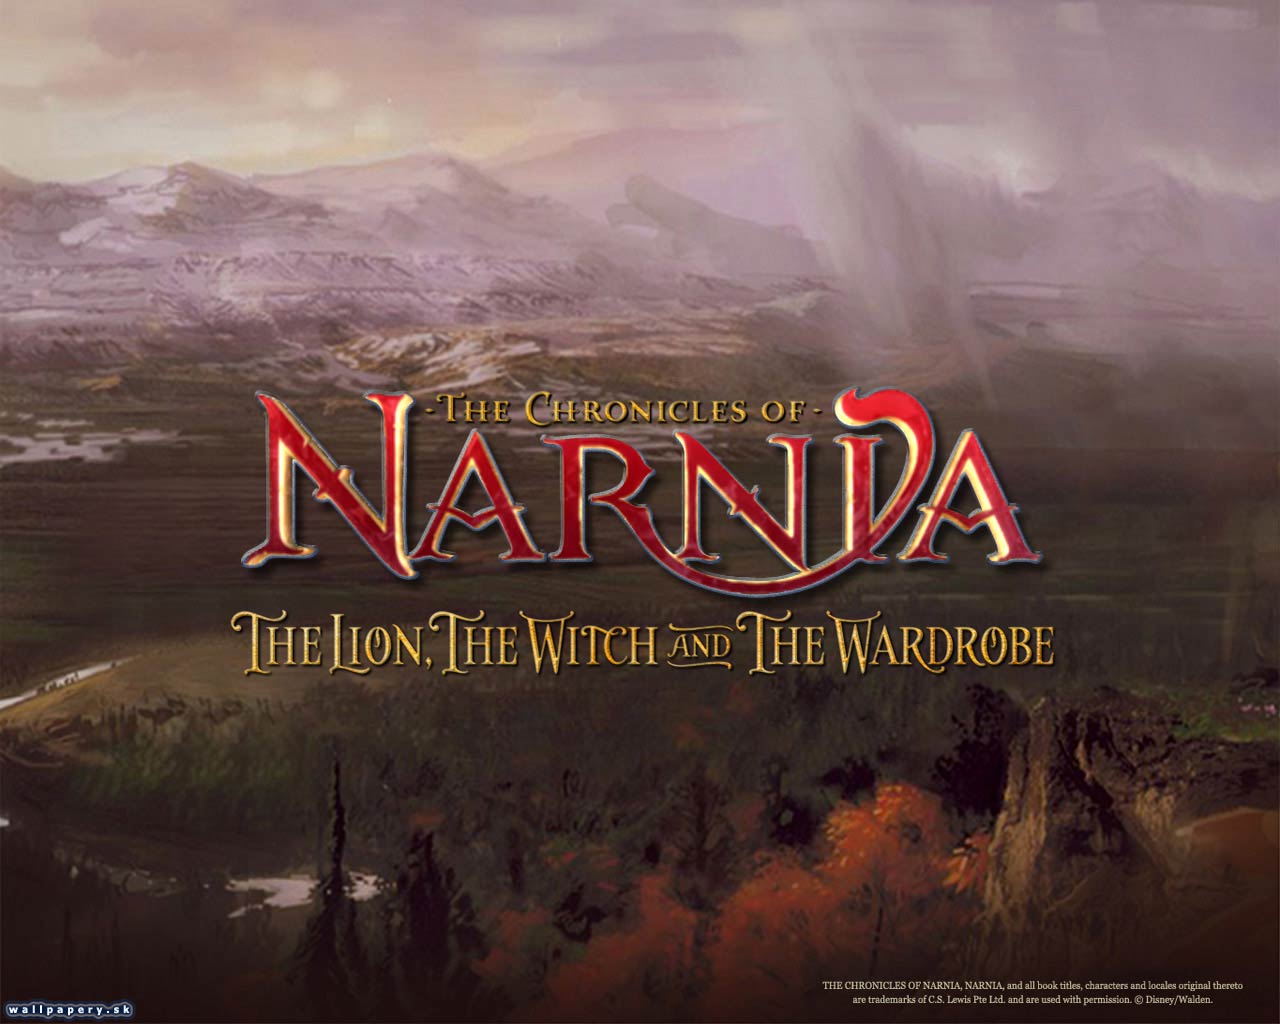 The Chronicles of Narnia: The Lion, The Witch and the Wardrobe - wallpaper 12